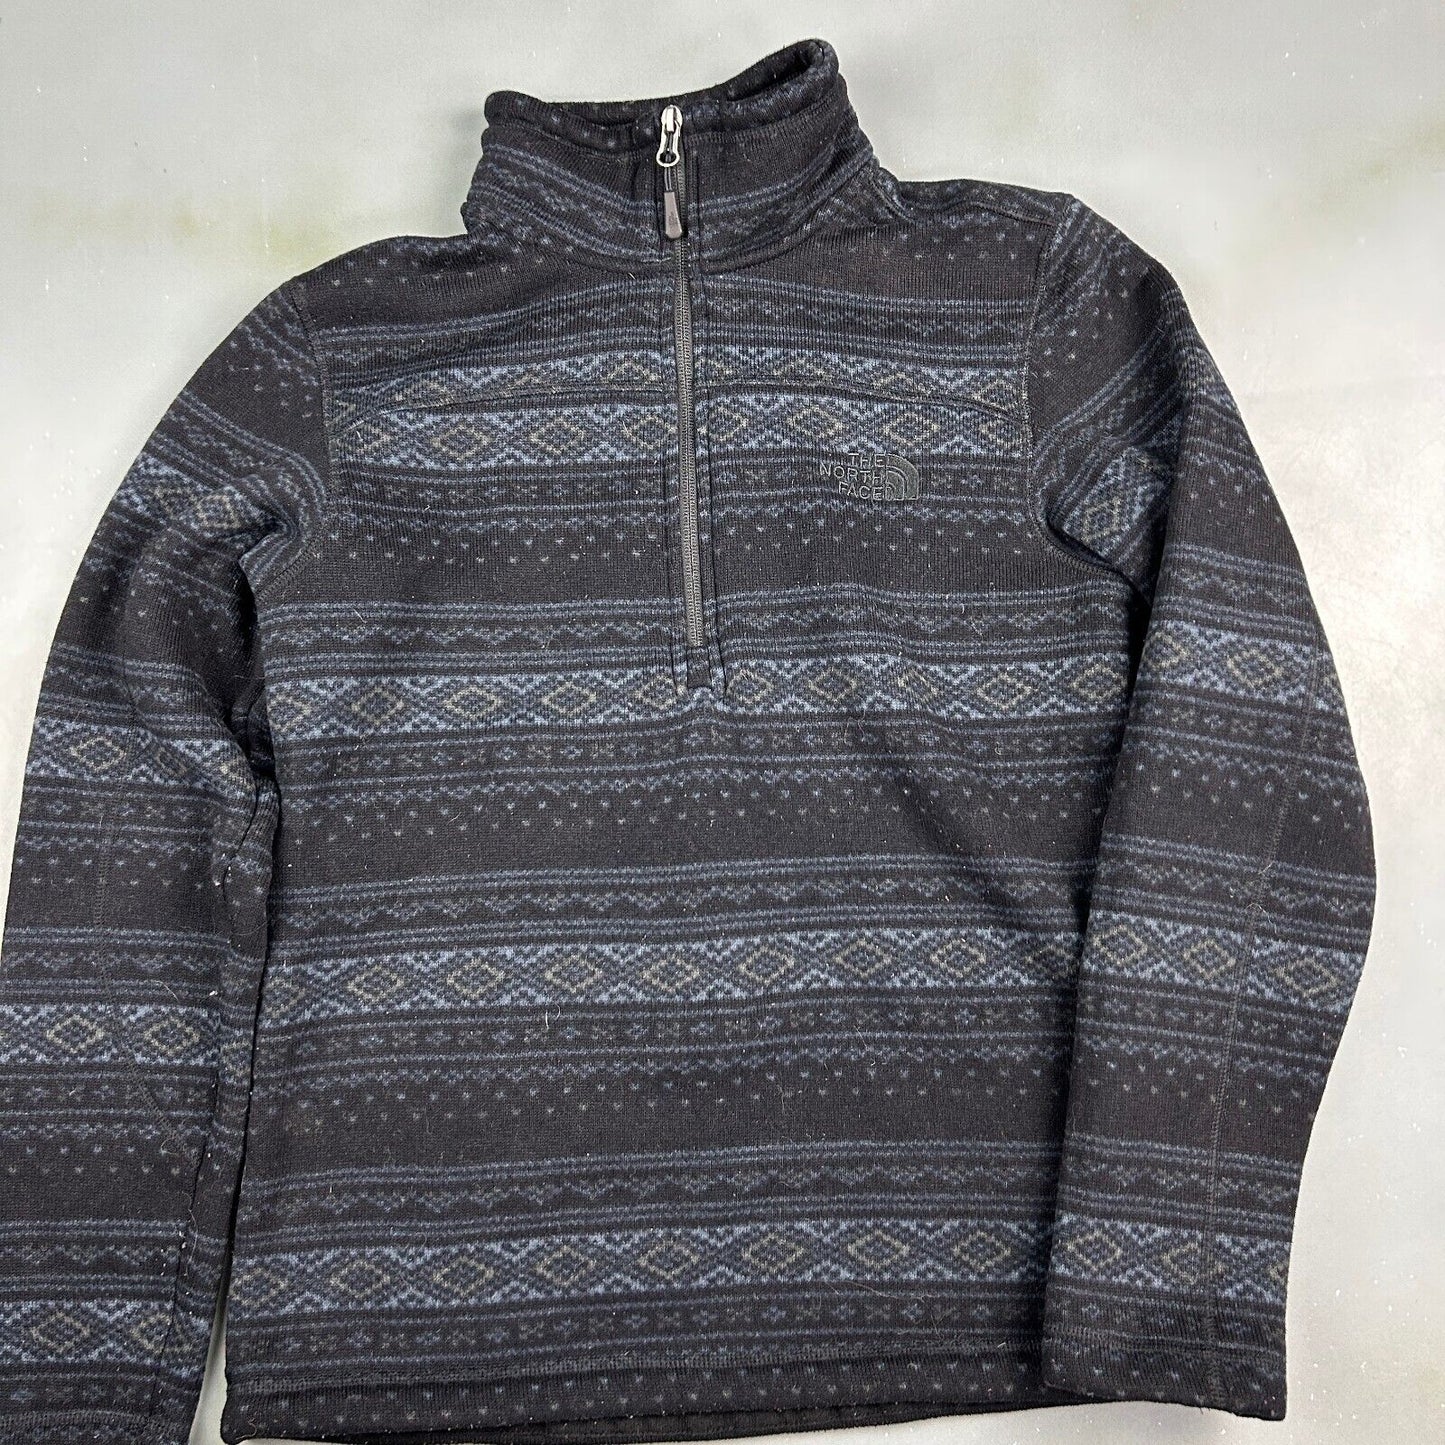 VINTAGE The North Face 1/4 Zip All Over Print Fleece Sweater sz Small Adult